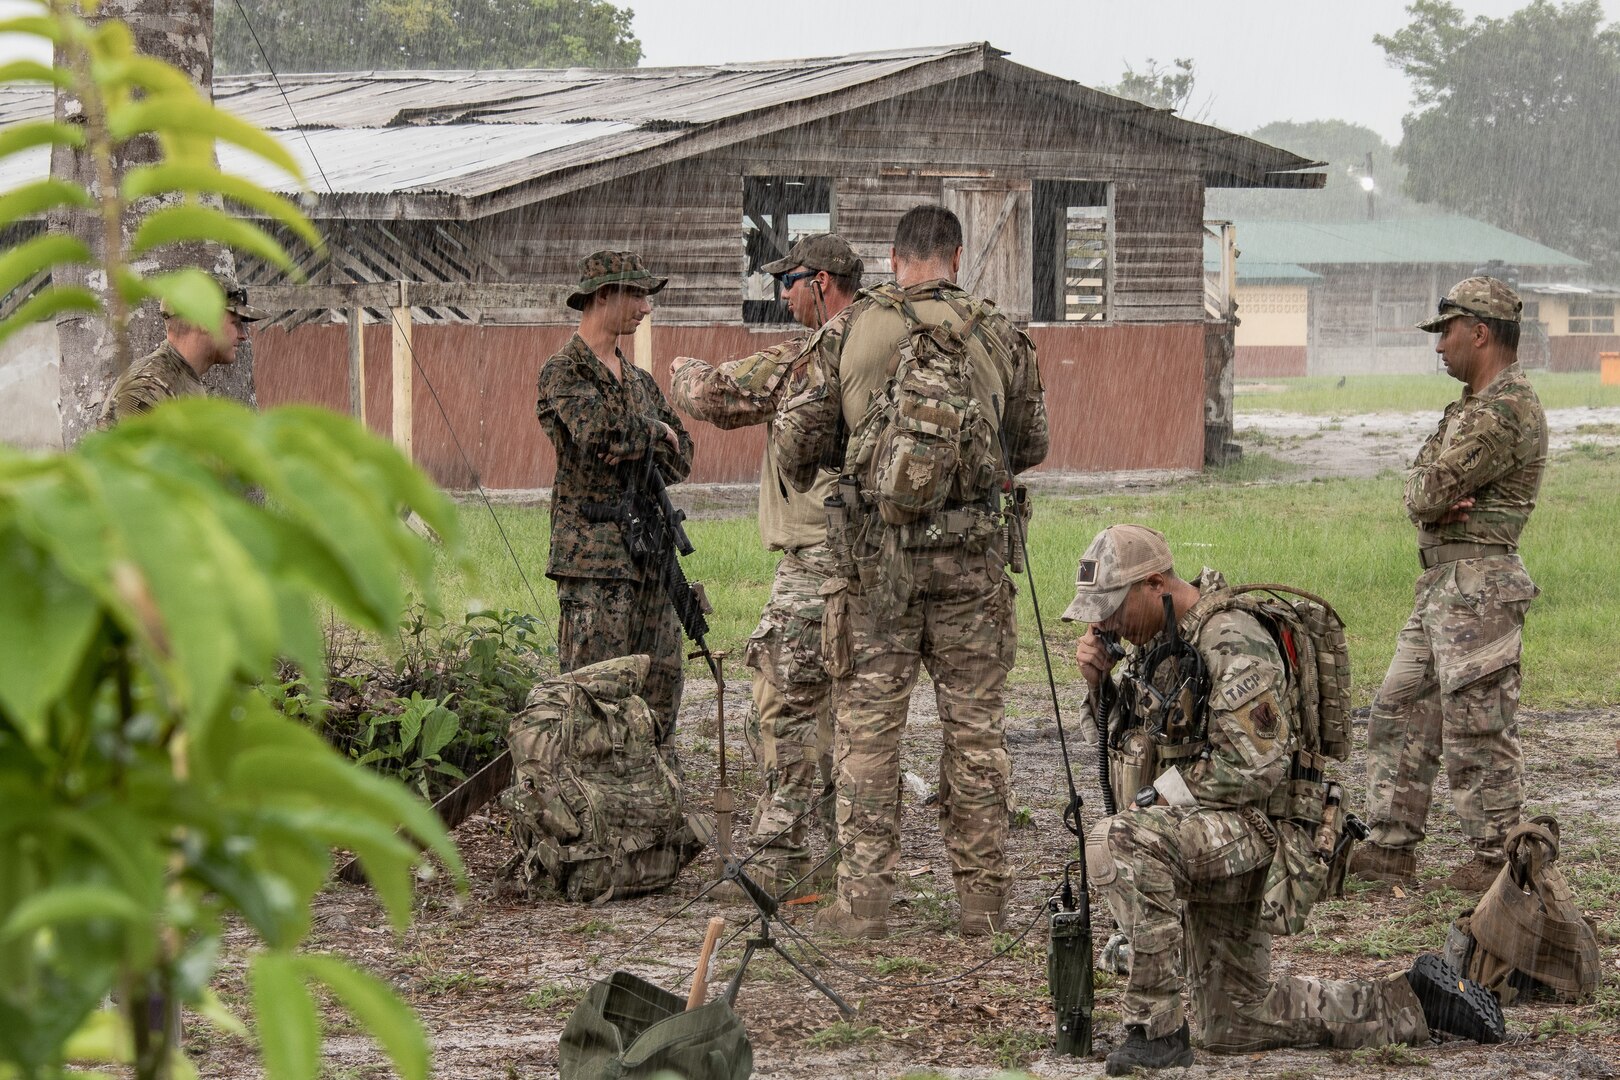 U.S. Airmen, Marines and Army Soldiers communicate with radios in the rain